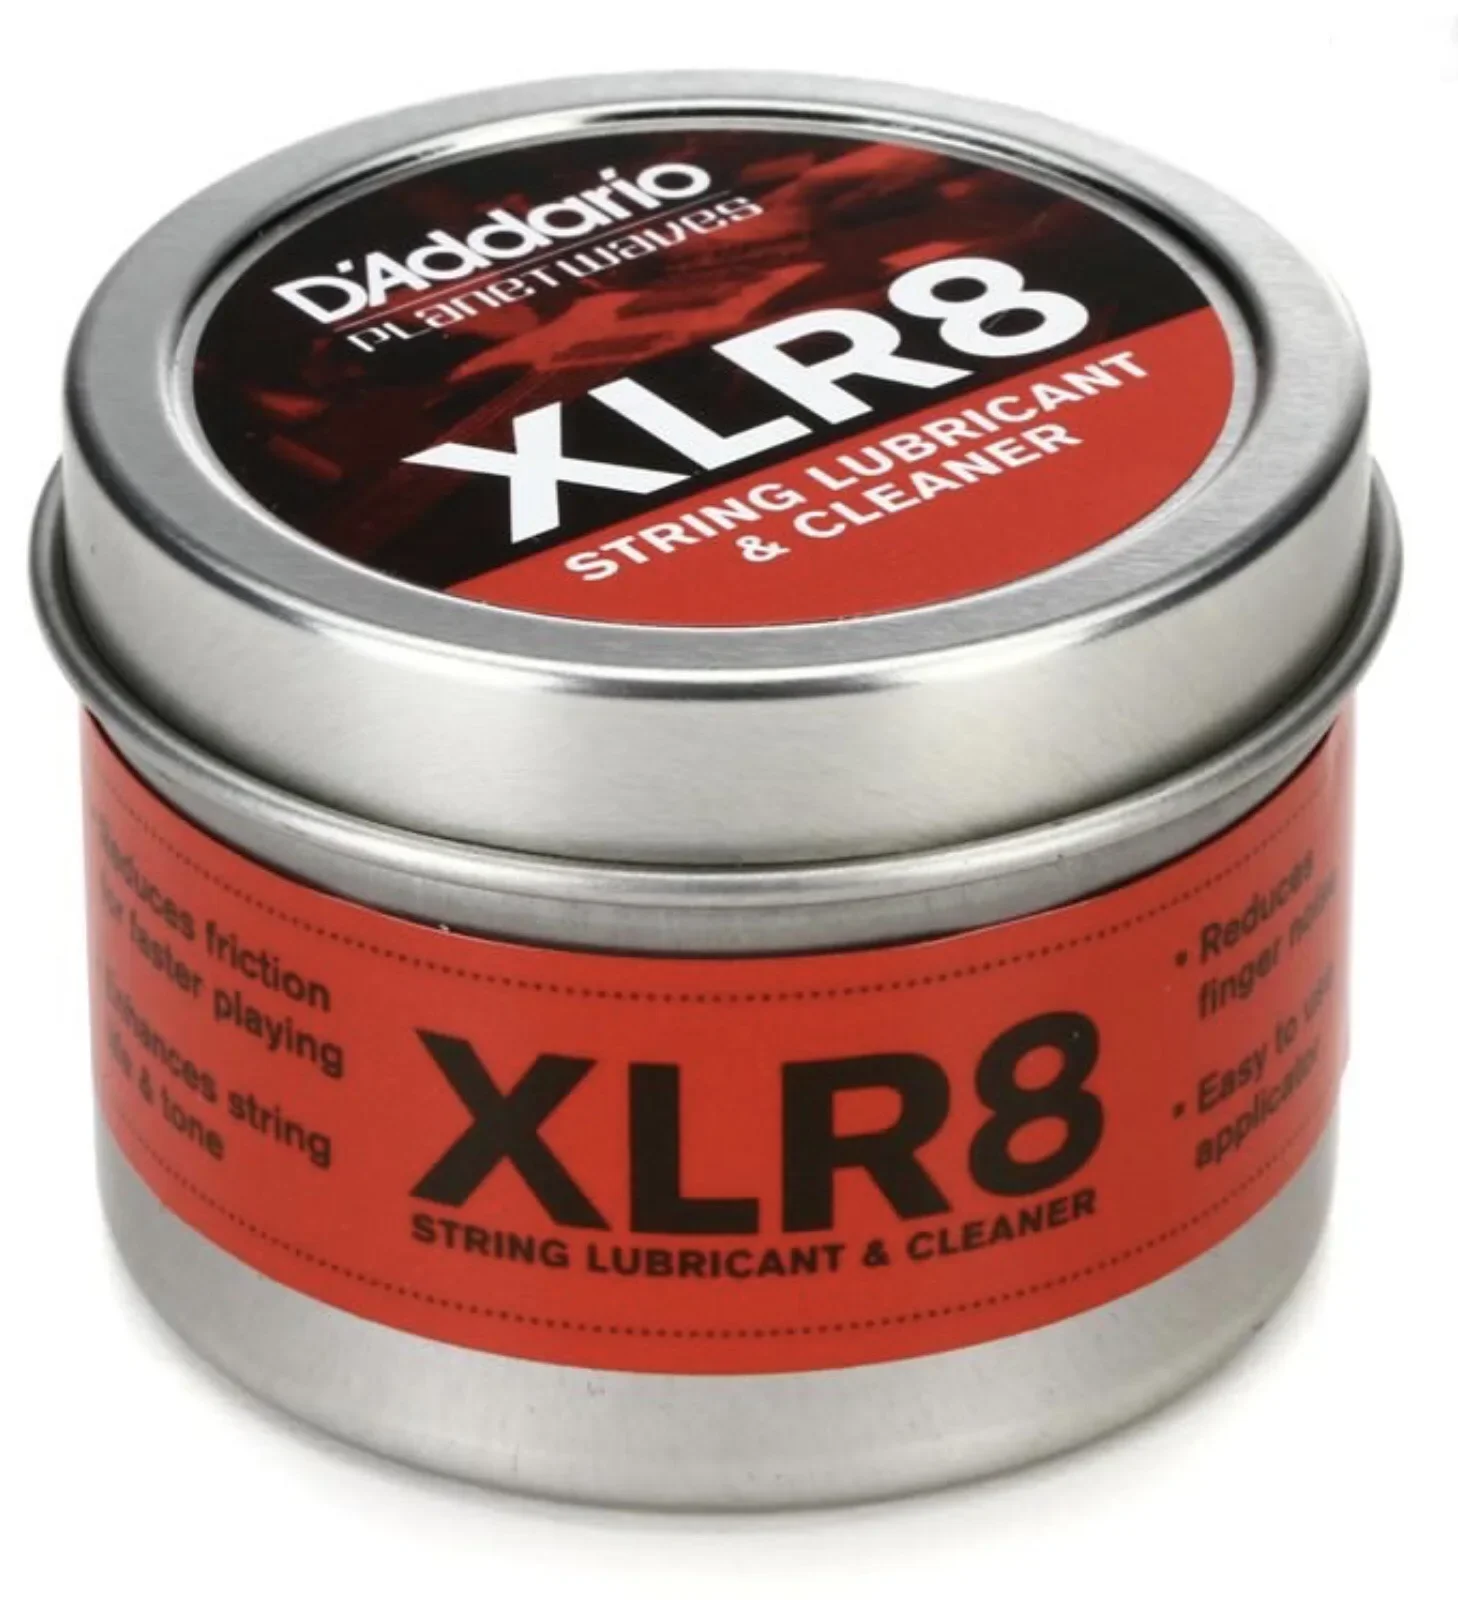 D’Addario XLR8 String Lubricant and Cleaner